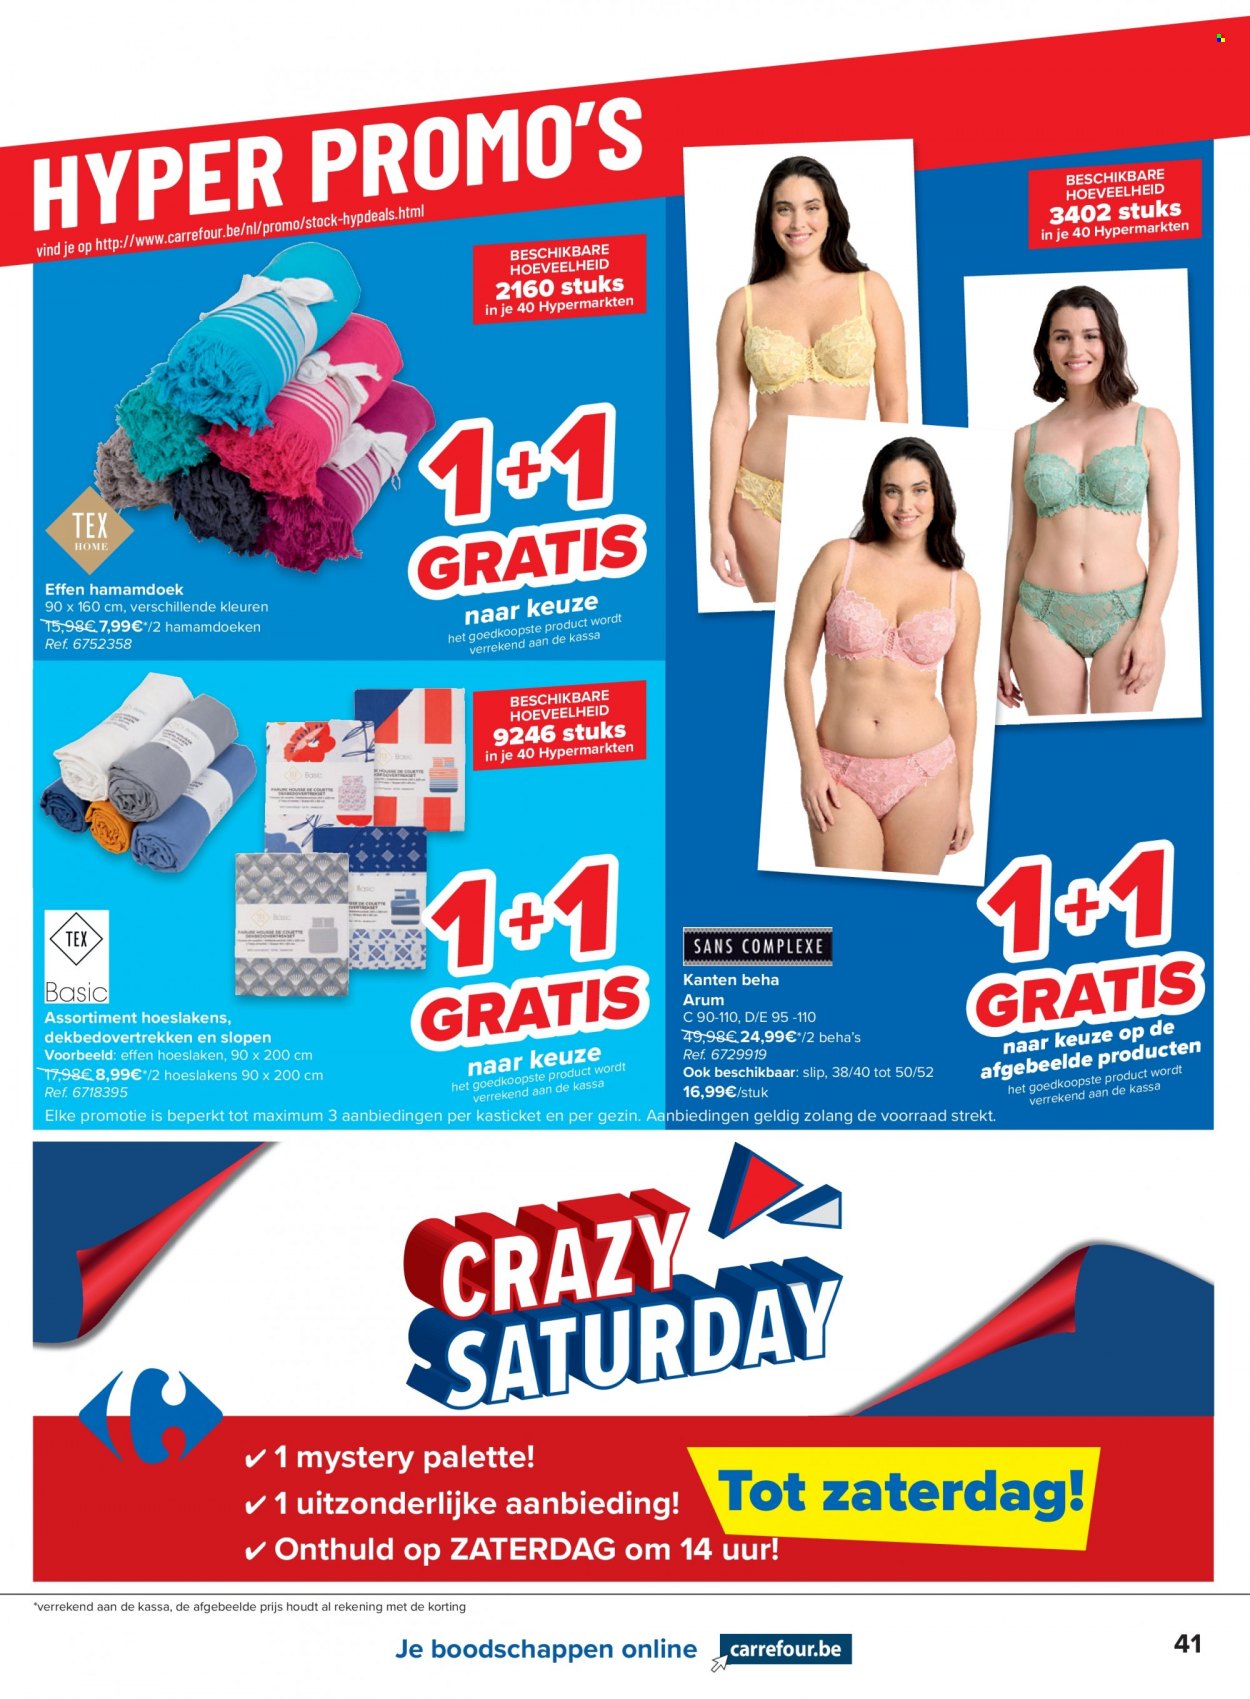 Catalogue Carrefour hypermarkt - 24.5.2022 - 30.5.2022. Page 41.